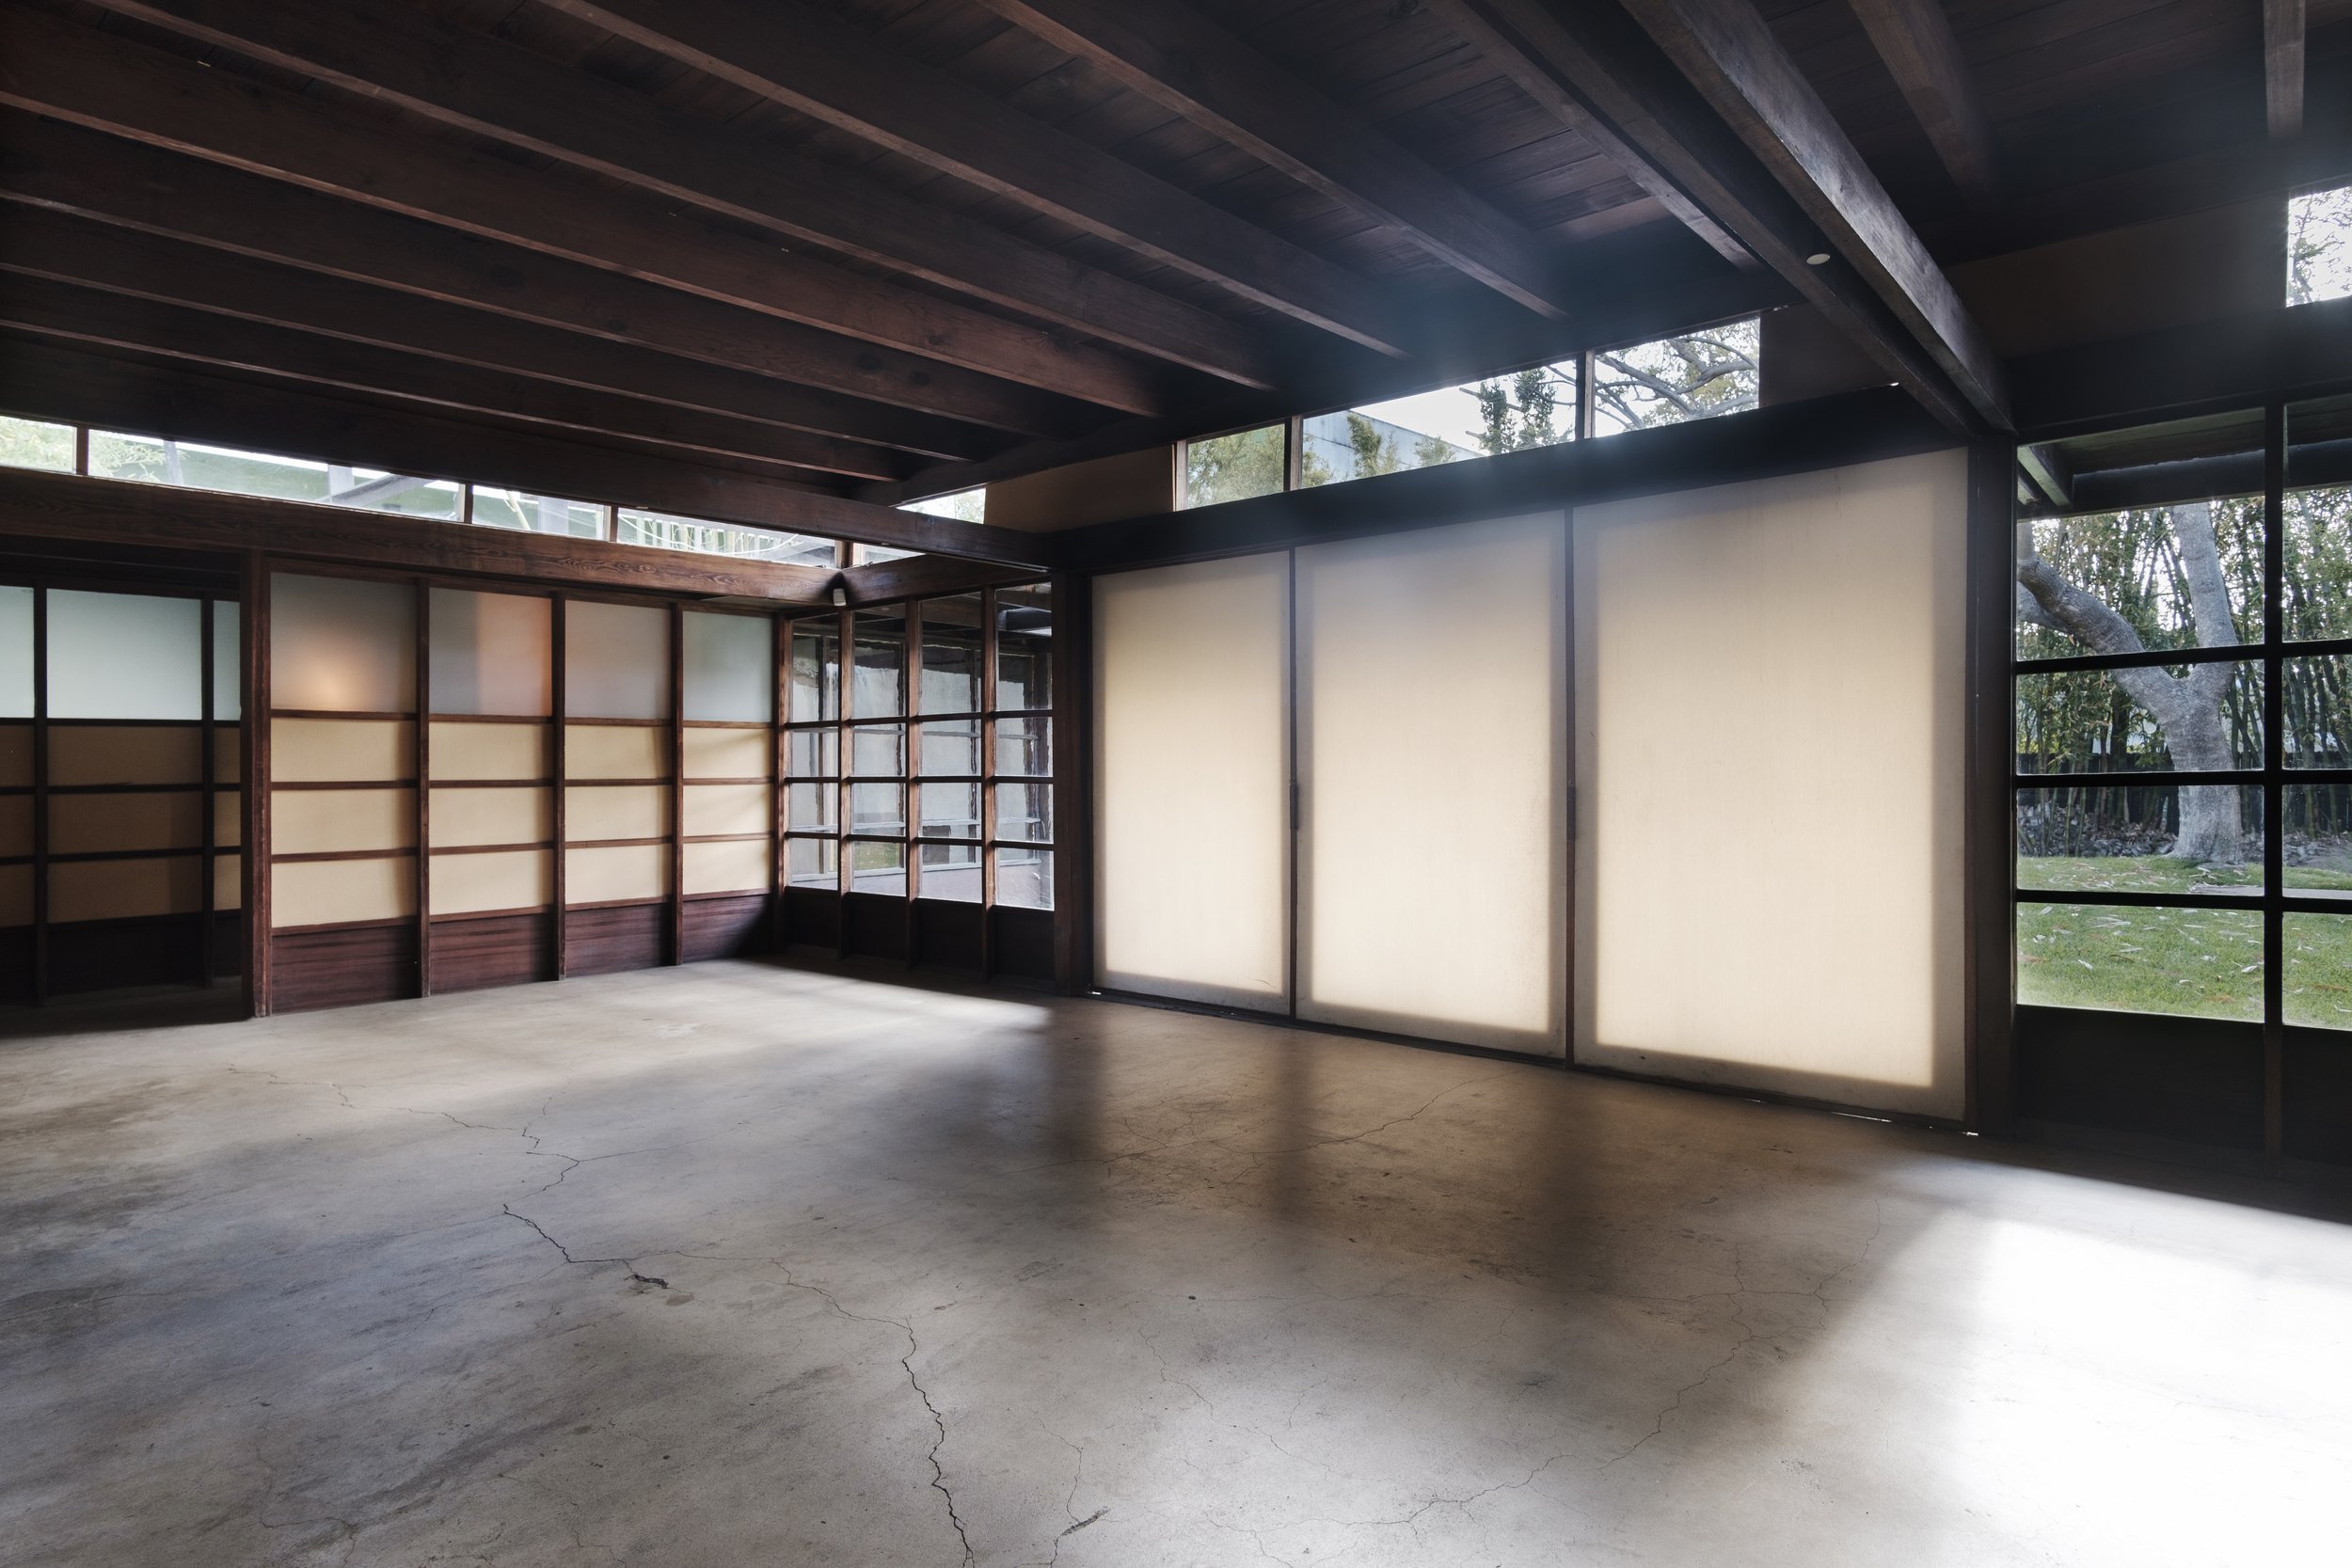 The Schindler House Interior Polished Concrete Floors - Rudolph Schindler 